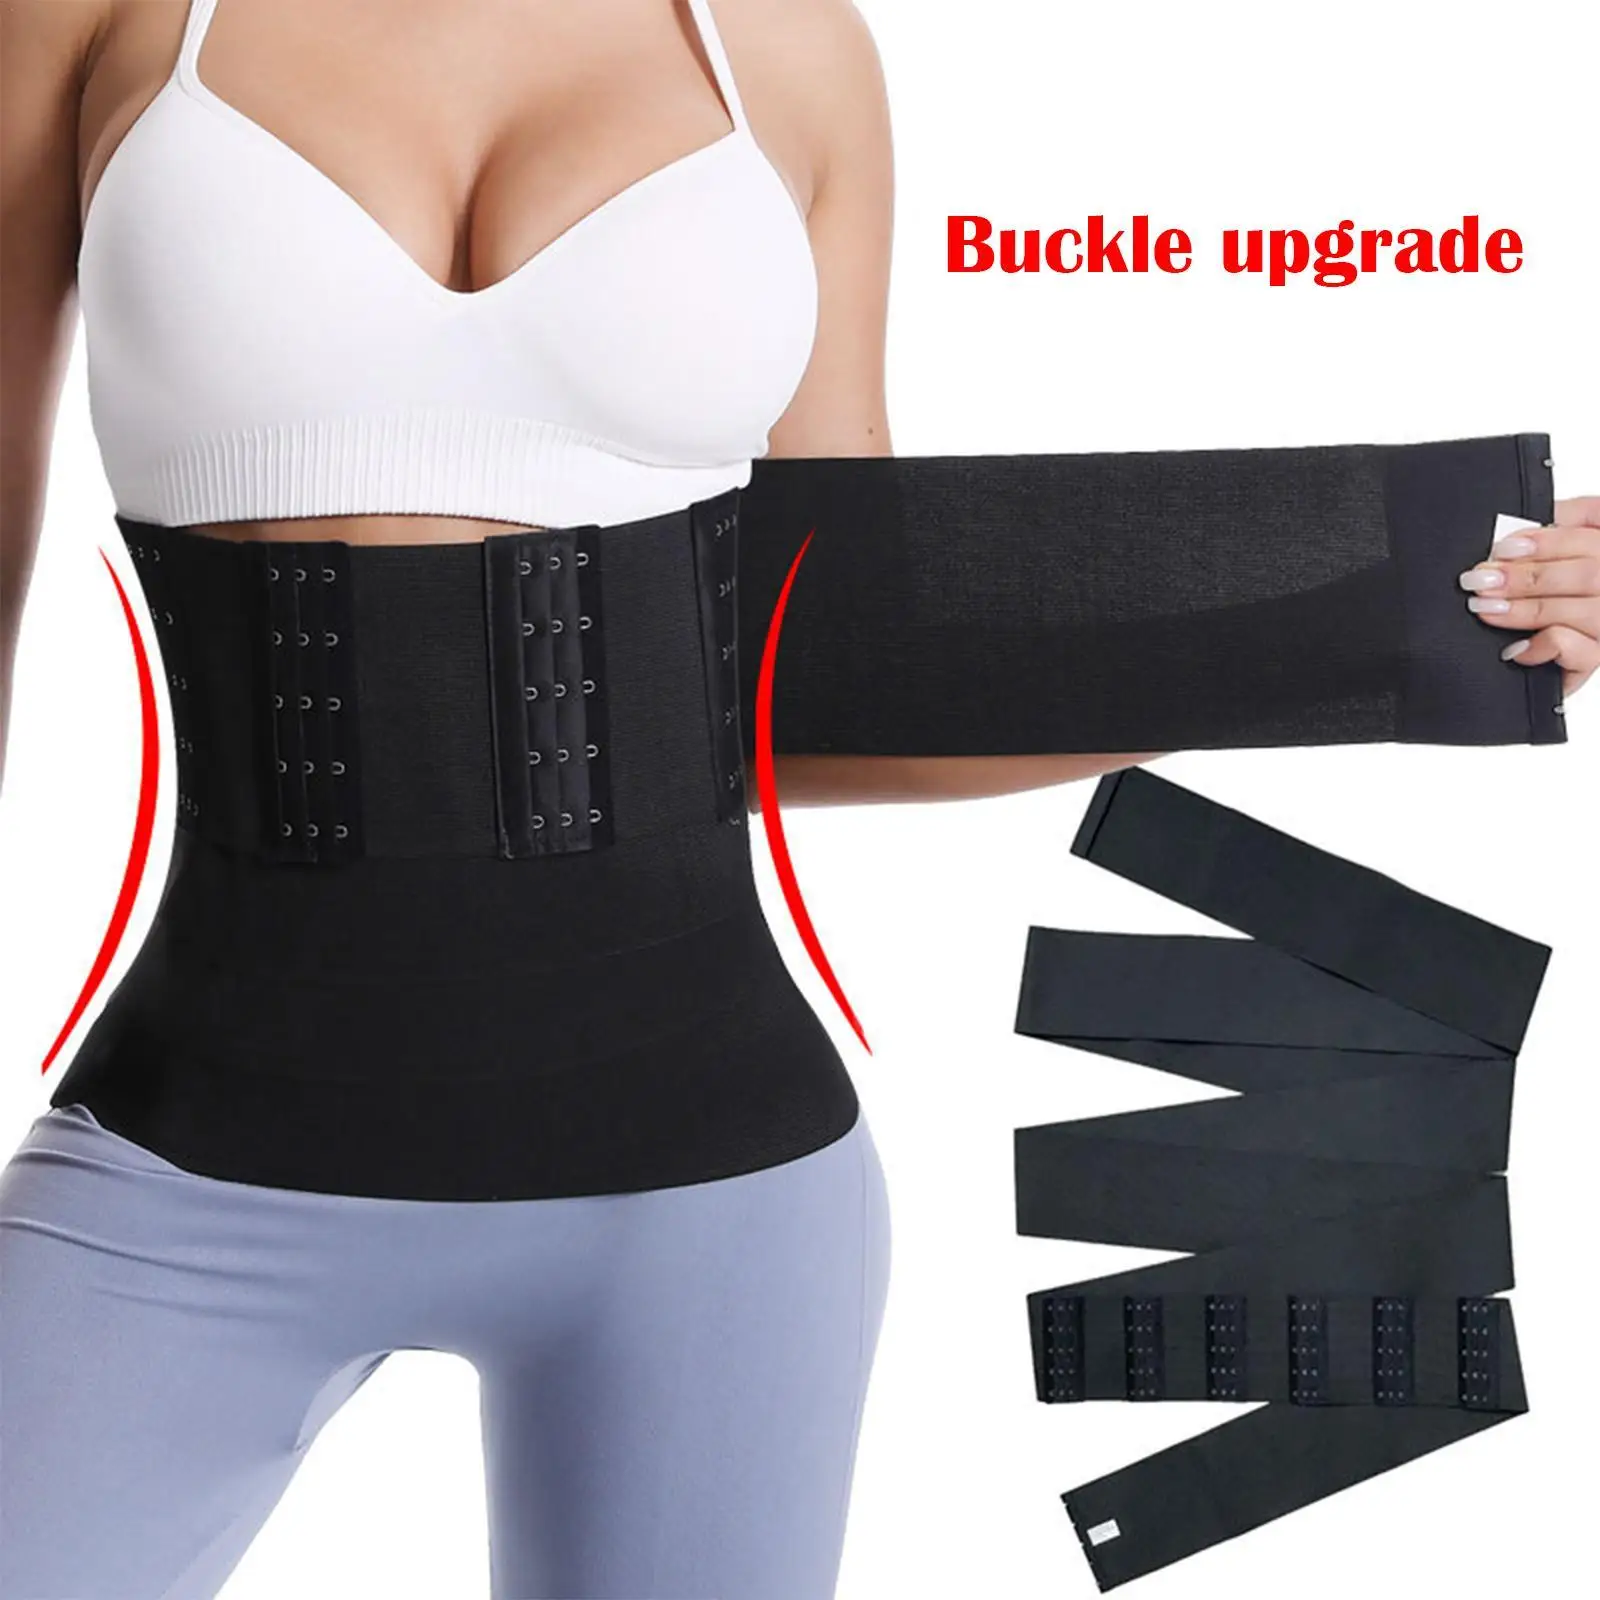 

Waist Trainer For Women Waist Trimmer Wraps Belt For Stomach With Loop Snatch Bandage Wrap Free Size Tummy Wrap Body Shapewear